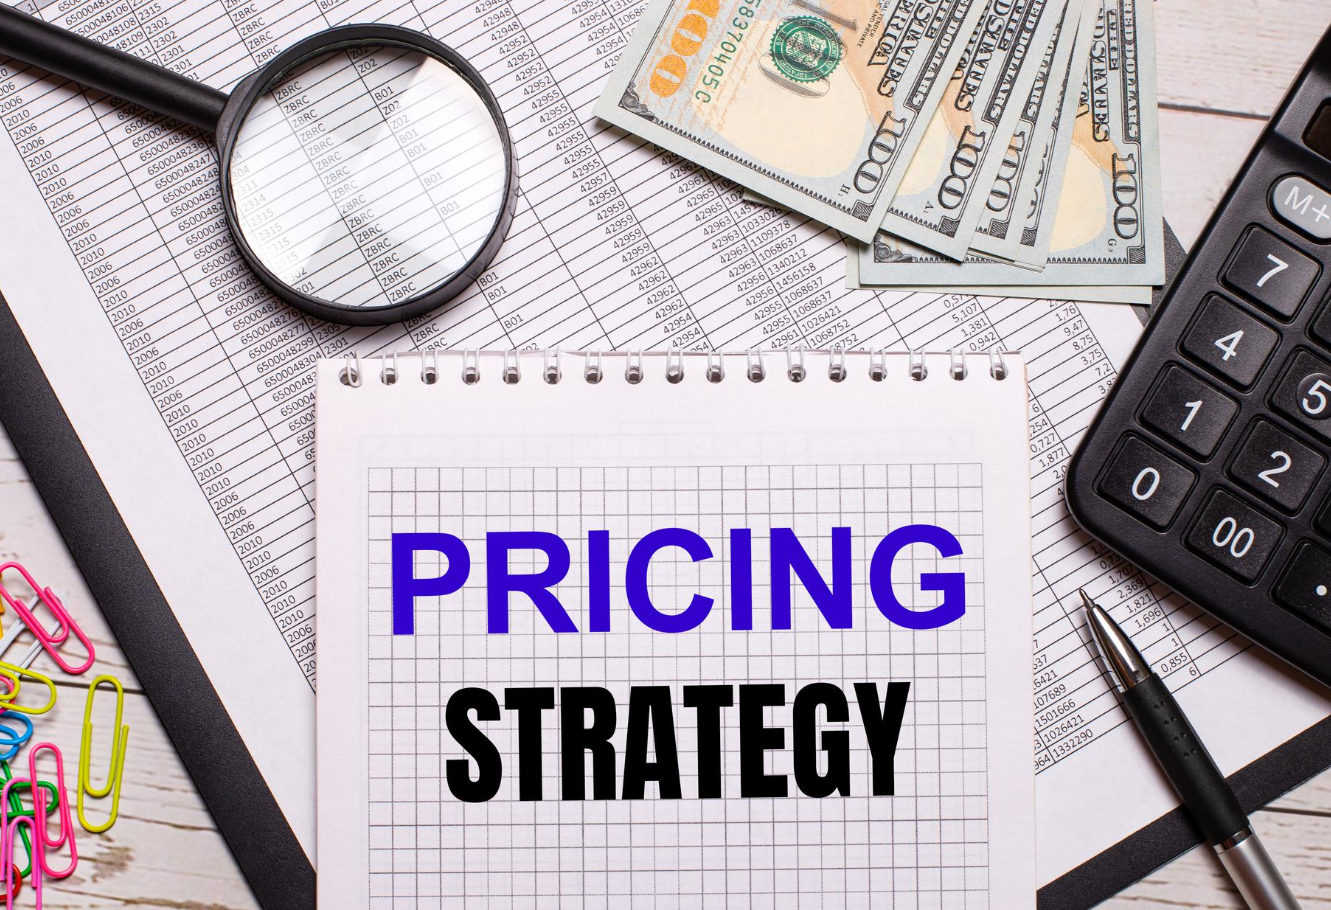 A notebook cover with the text "pricing strategy"